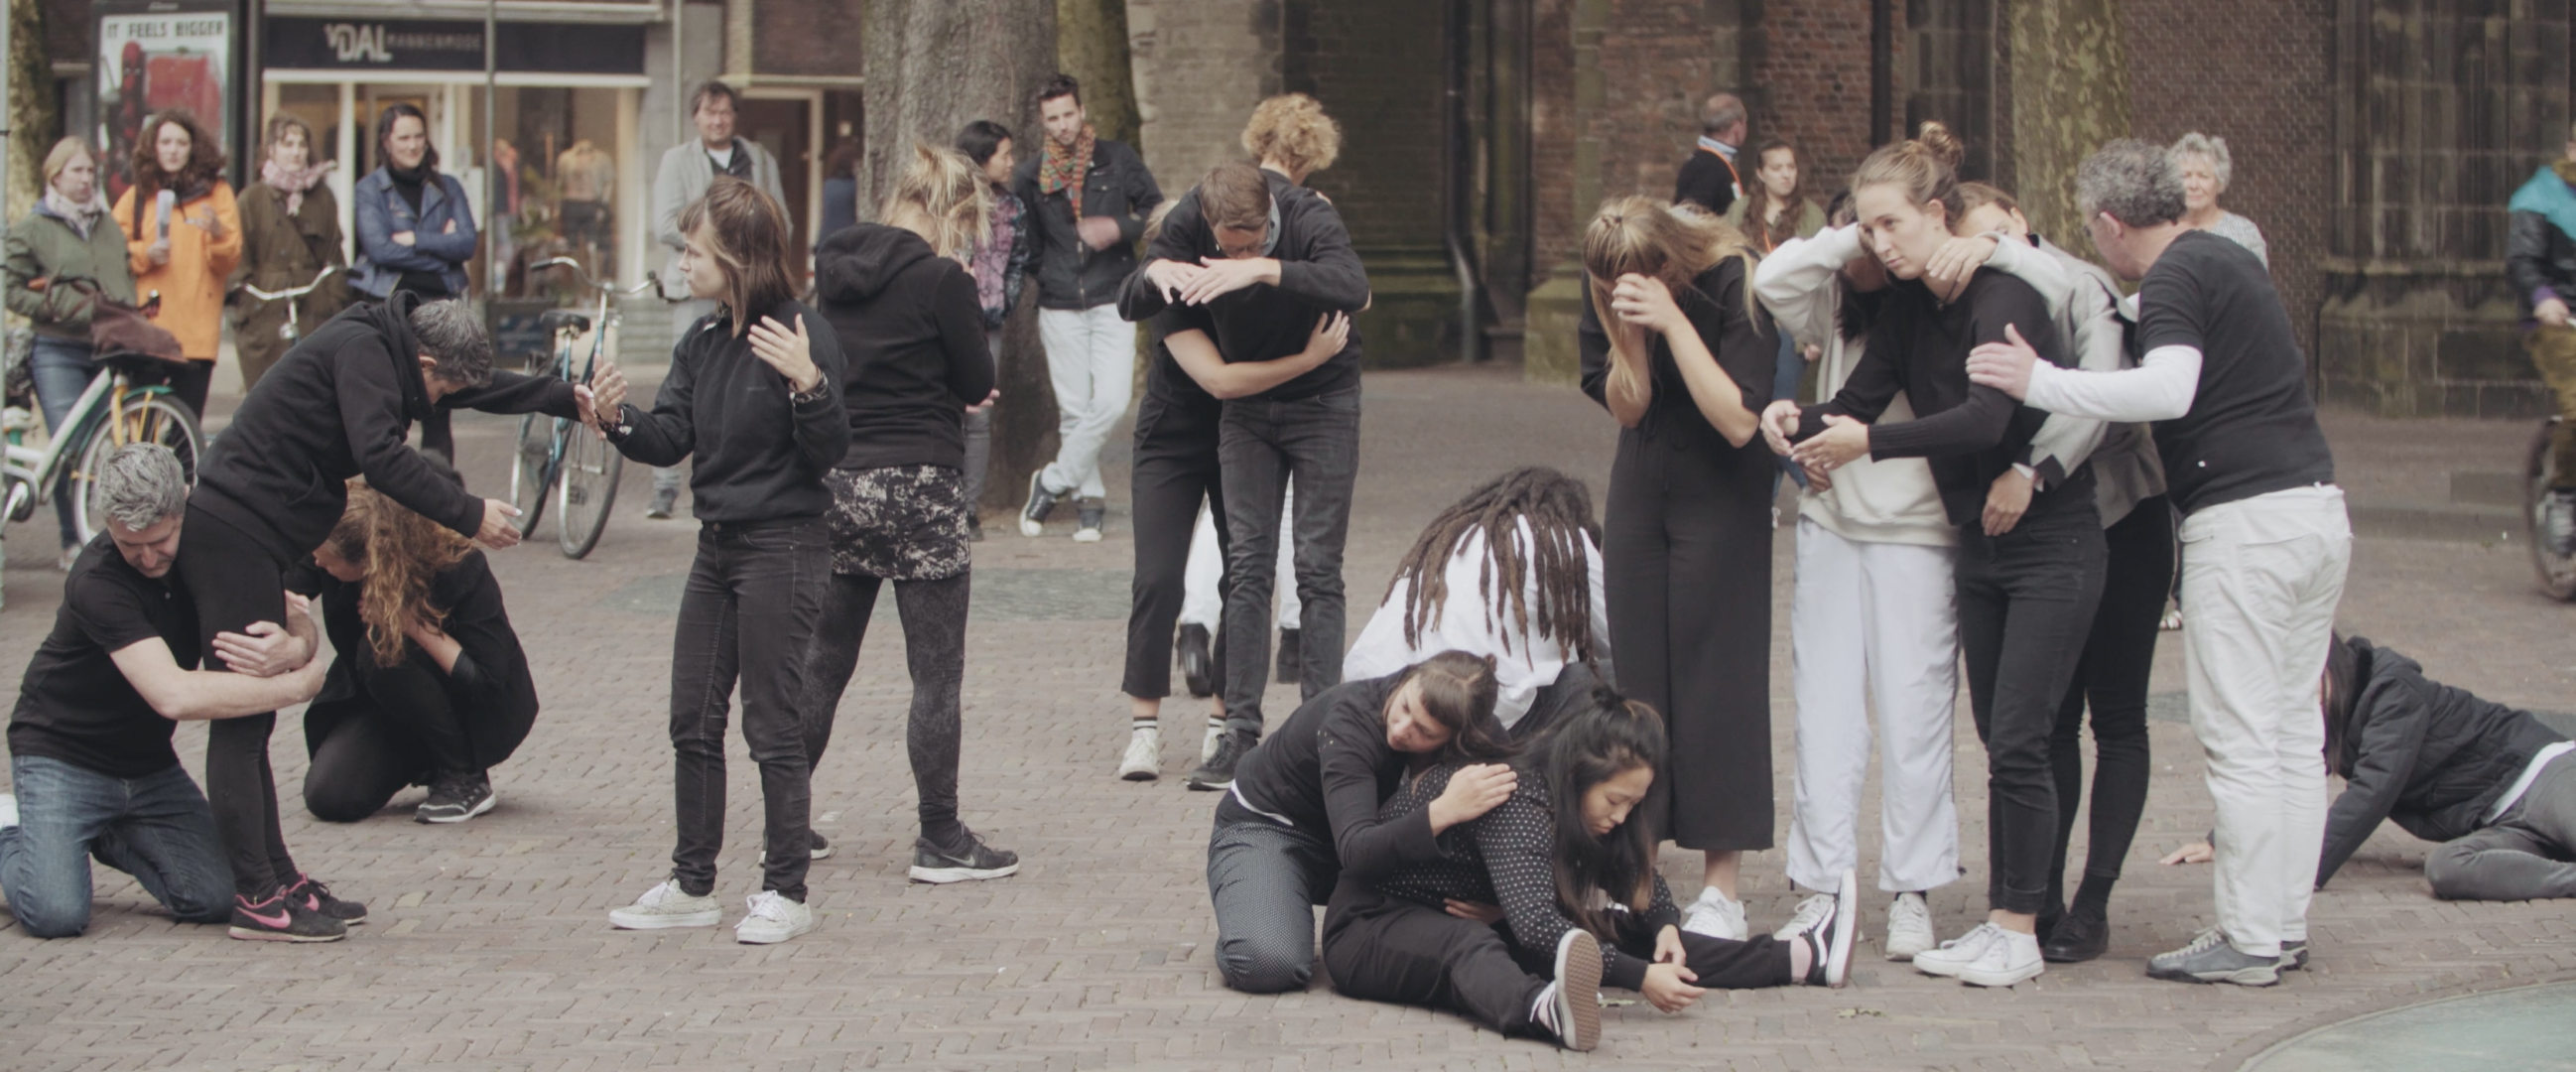 Isaac Chong Wai, Collective Individual Exercises (2018). Performance. Courtesy of SPRING Festival Utrecht.